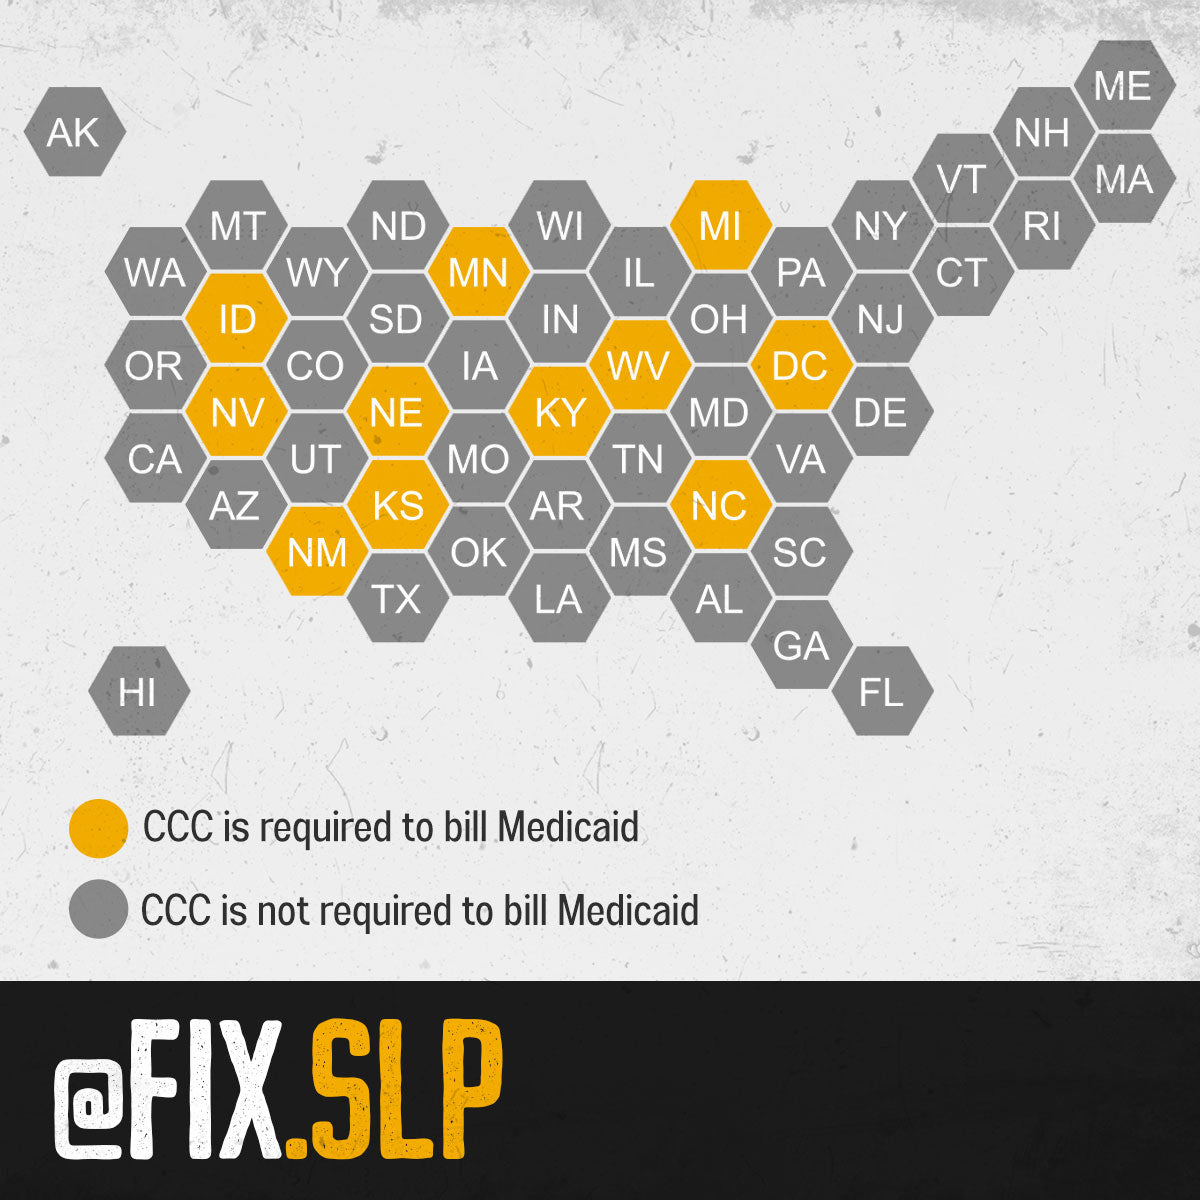 SLP Medicaid billing regulations by state organized in hexagonal map format.